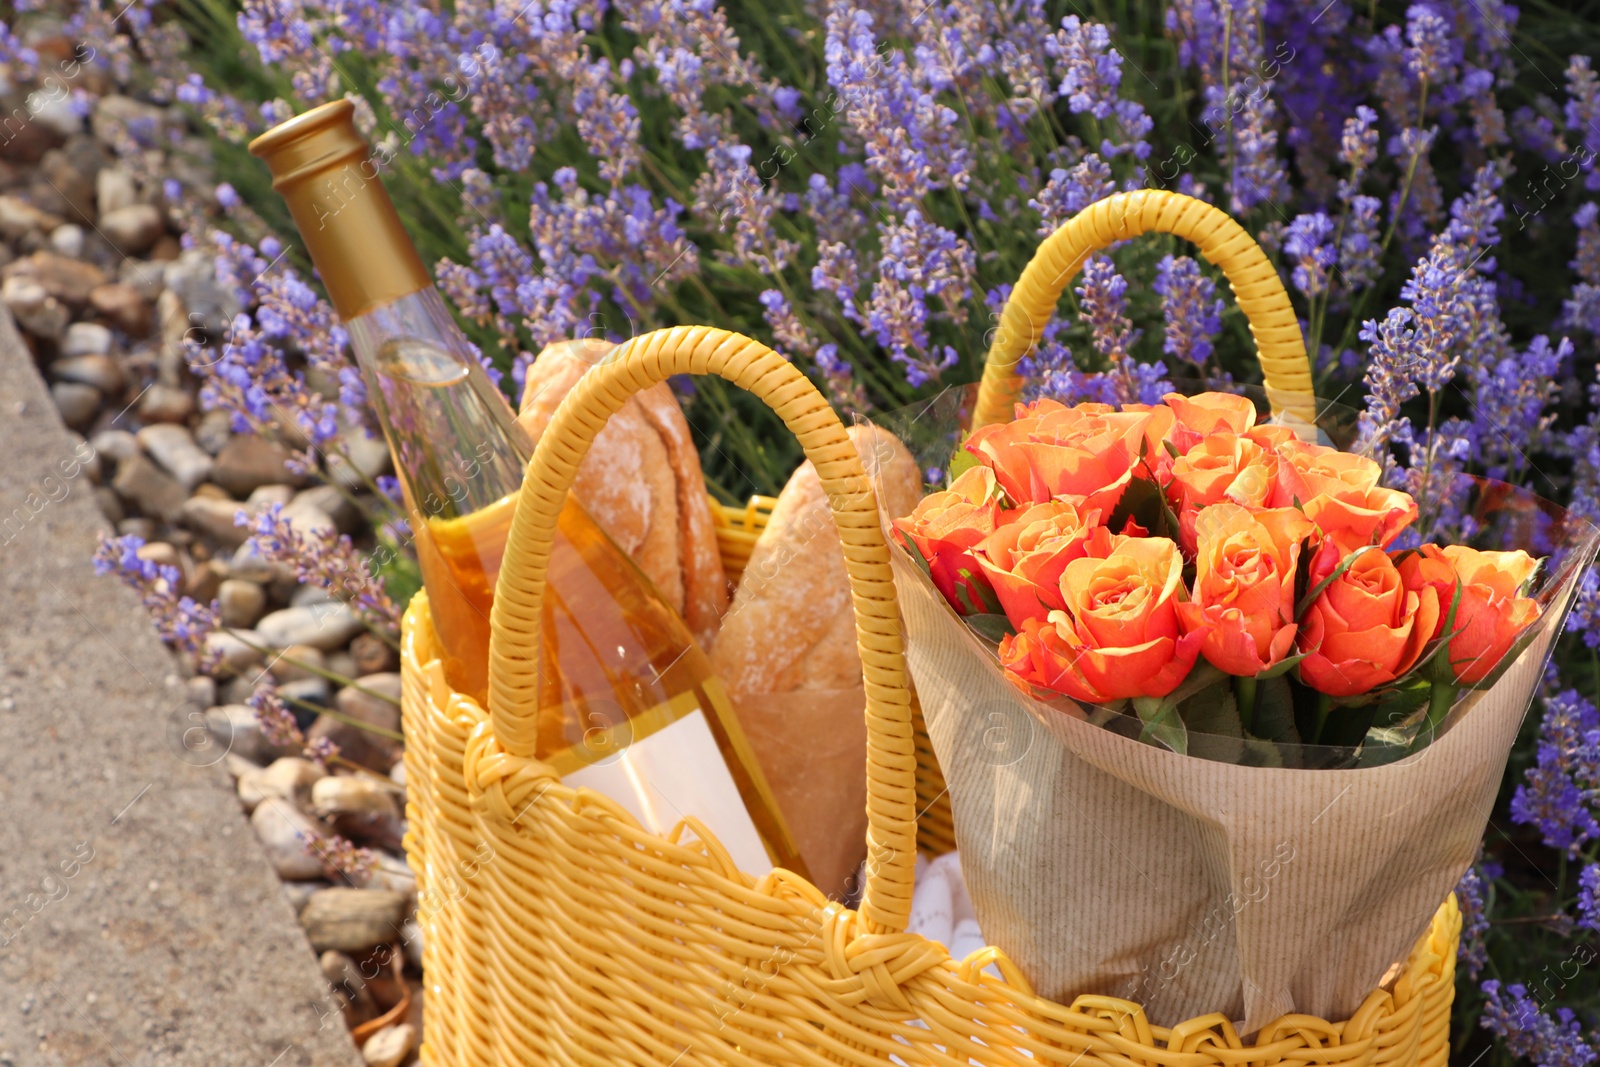 Photo of Yellow wicker bag with beautiful roses, bottle of wine and baguettes near lavender flowers outdoors, closeup